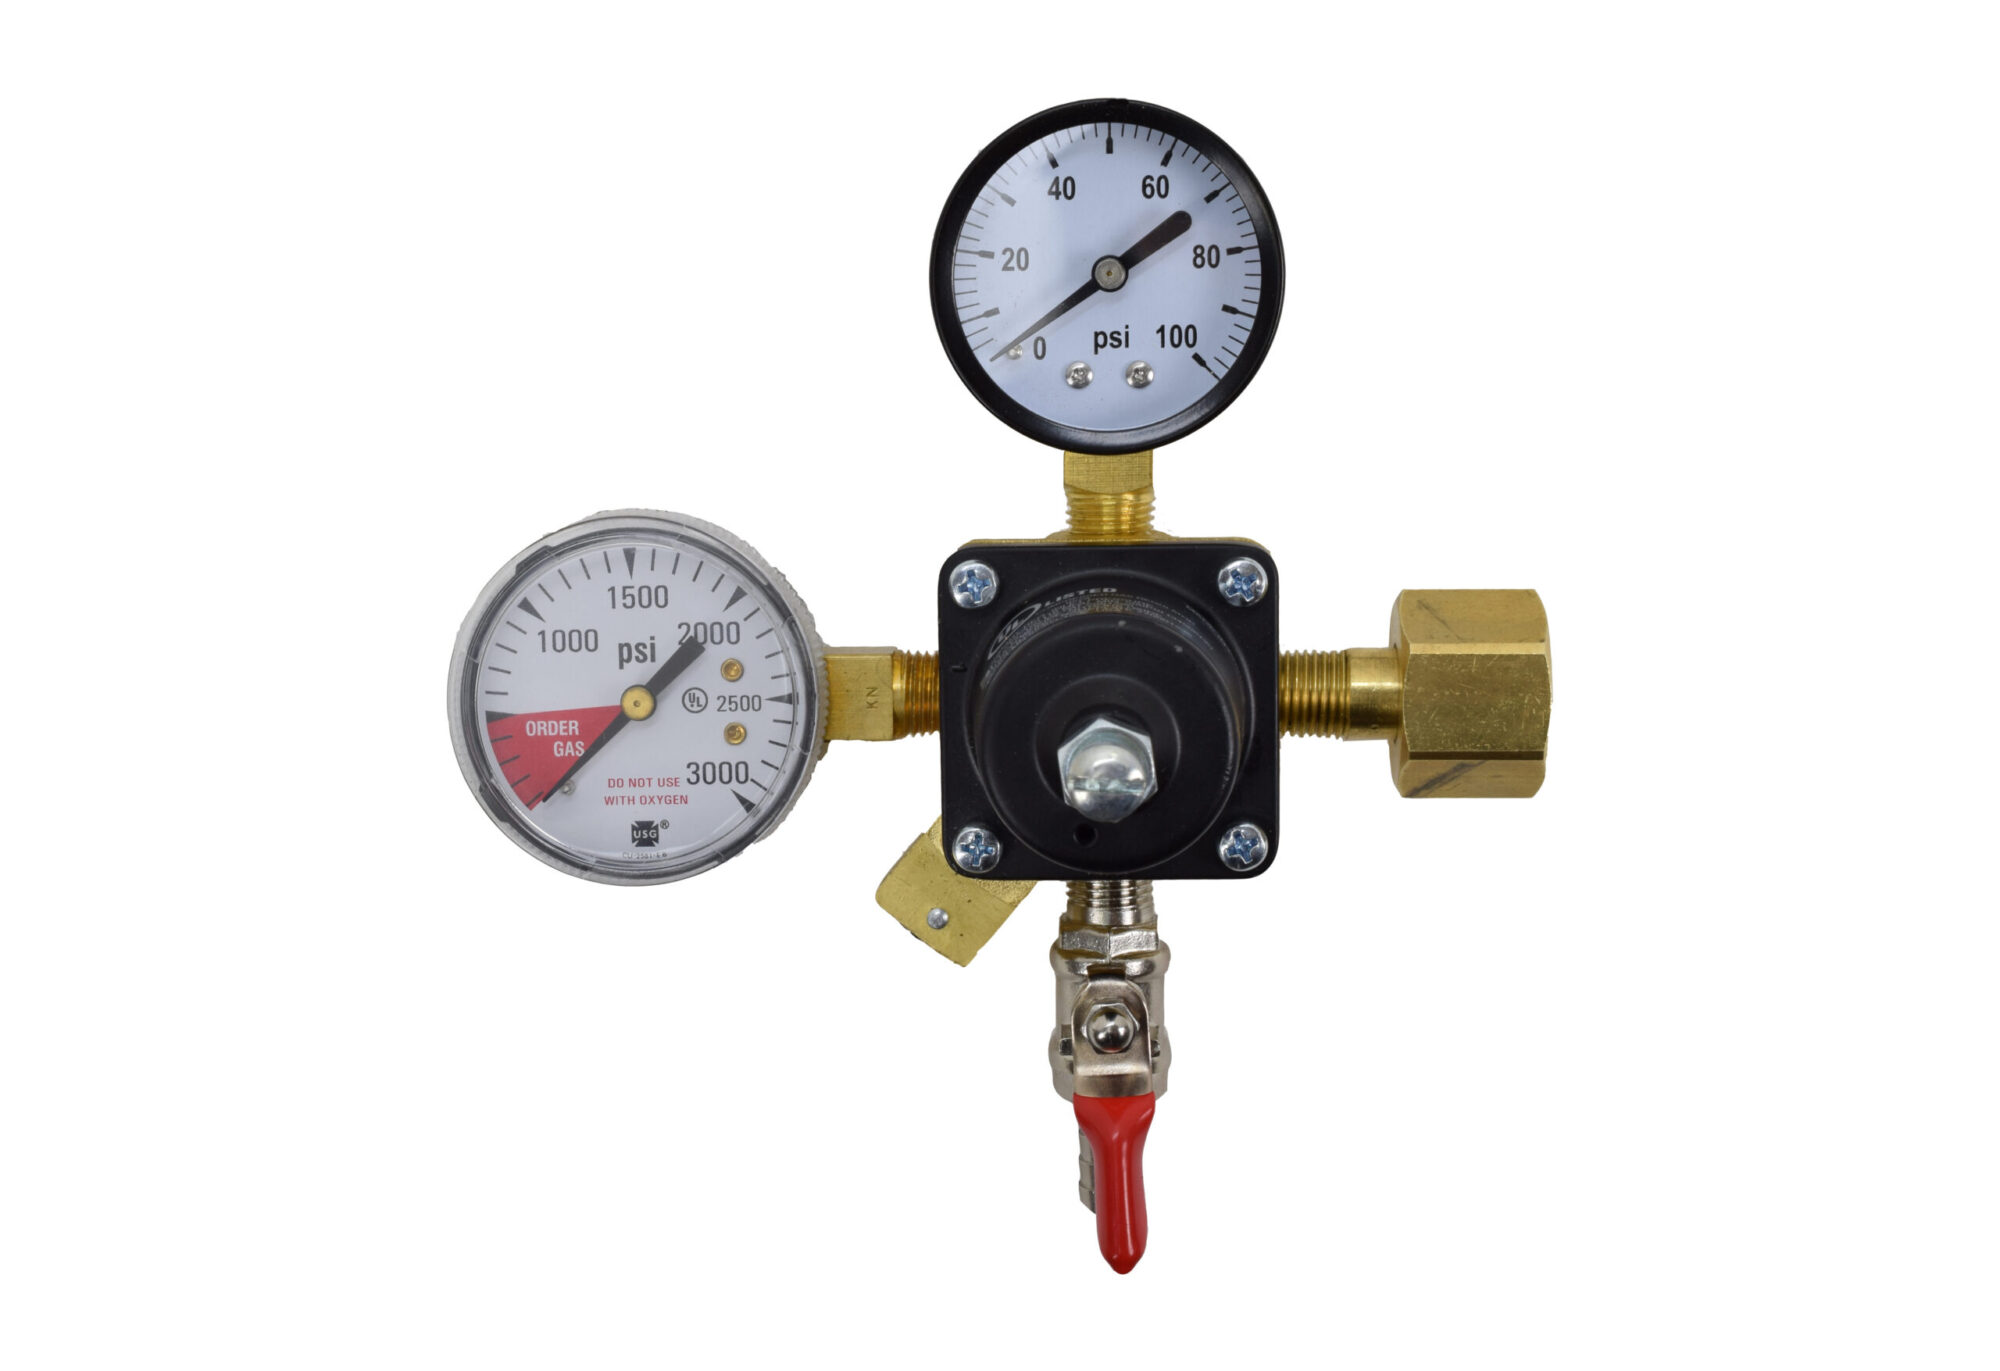 710H High Pressure CO2 Regulator with 100 PSI Gauge and Check Valve Air Cock